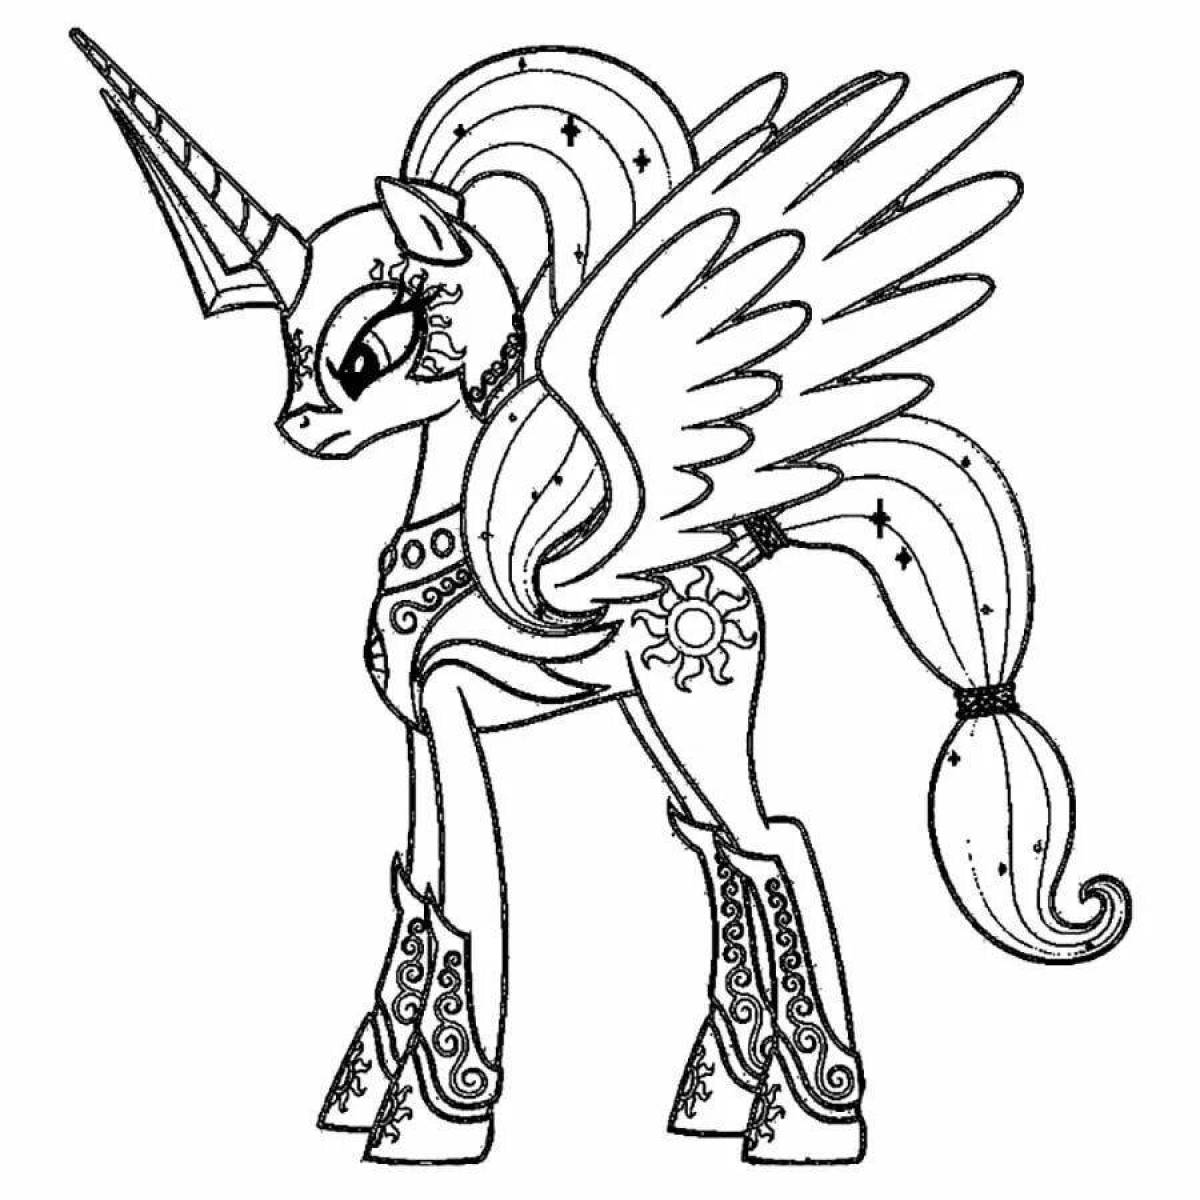 Wonderful Mae Little Pony coloring book